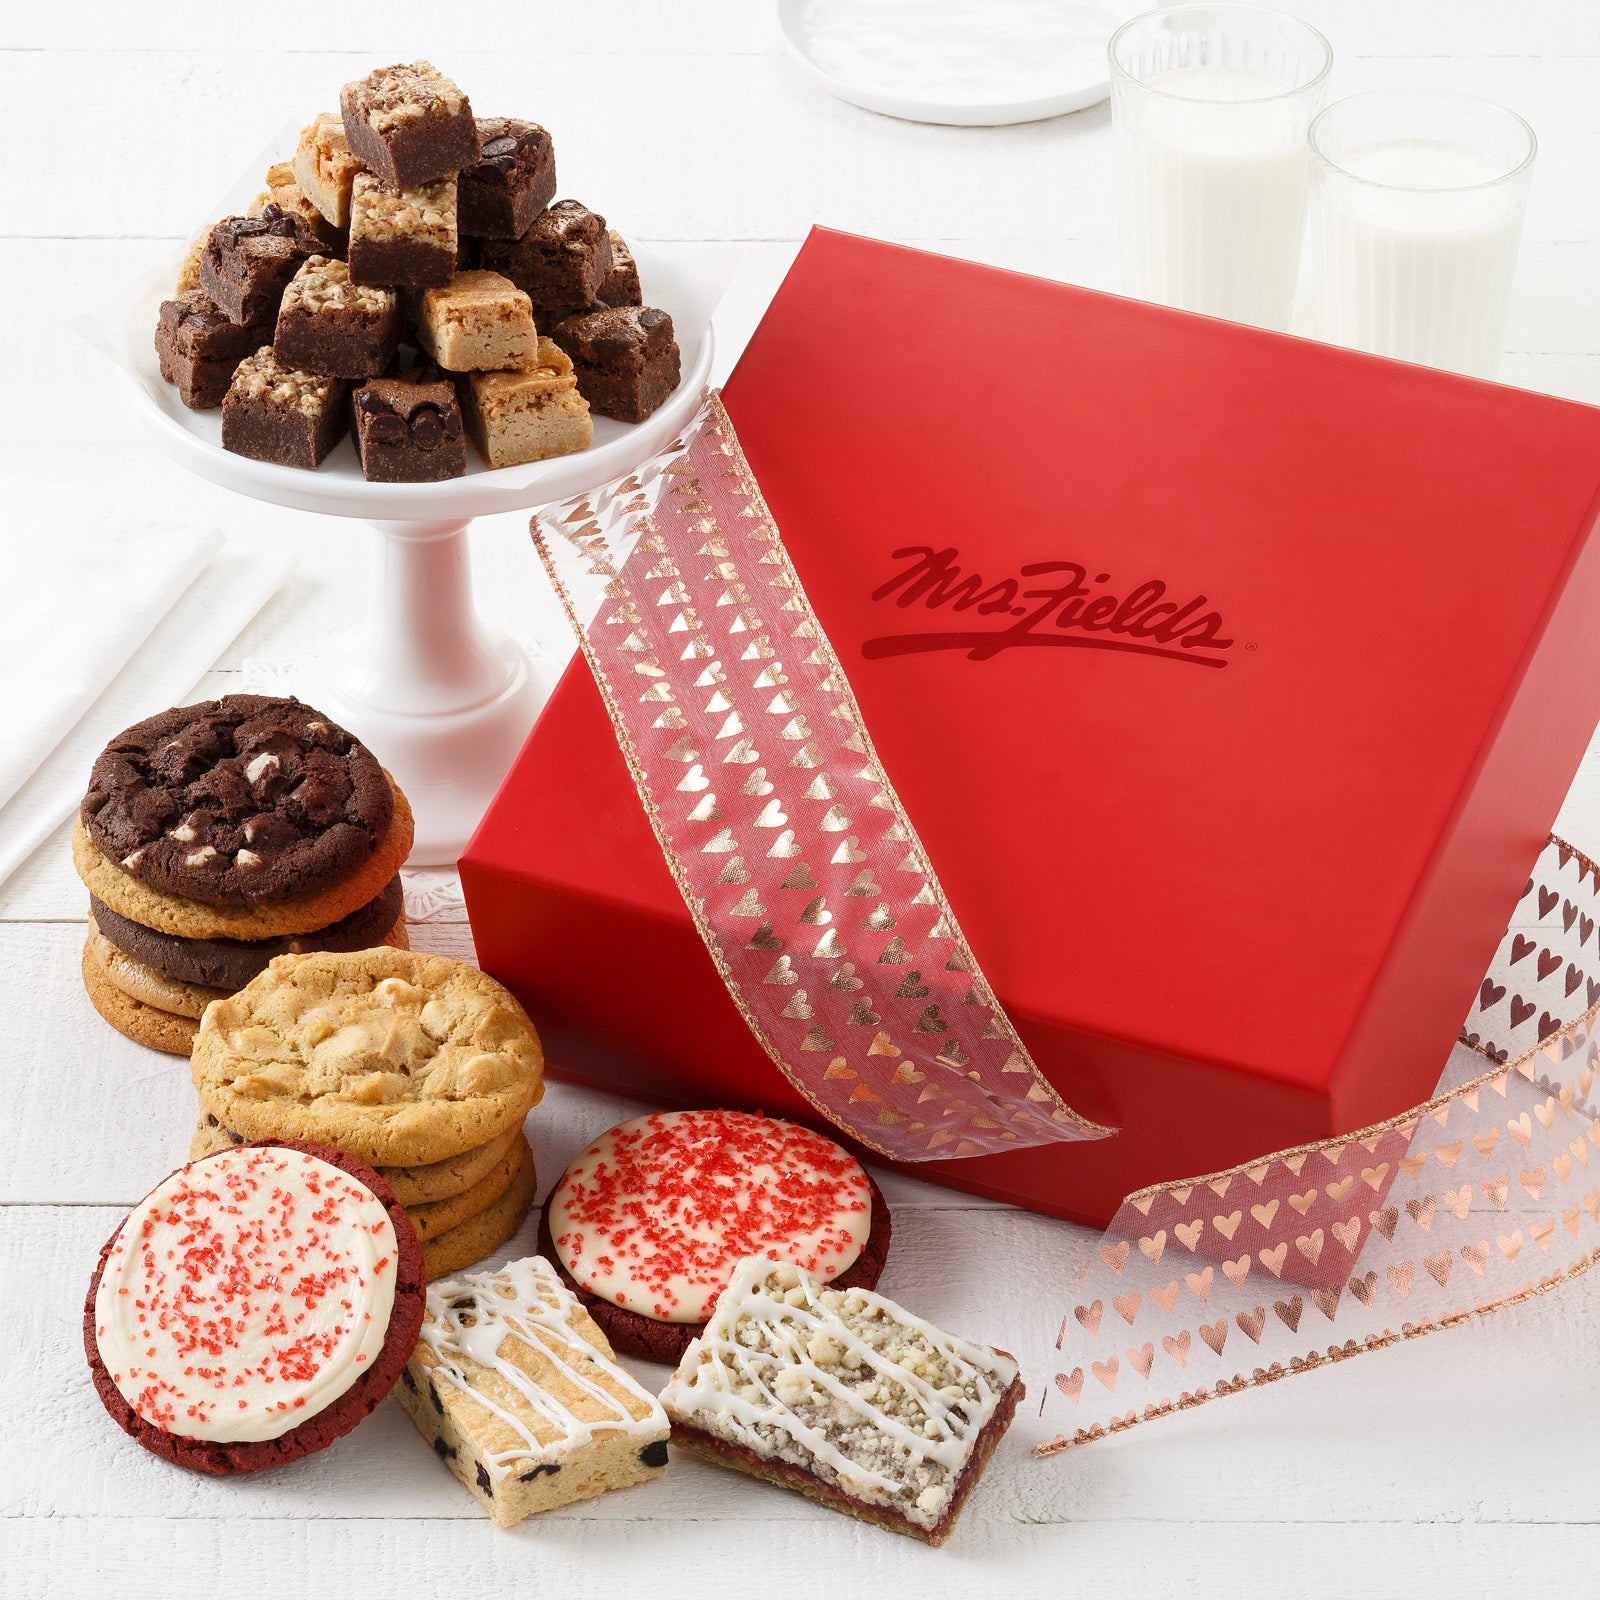 A red Mrs. Fields gift box with a heart ribbon and surrounded by an assortment of original cookies, brownie bites, fruit bars, and two frosted red velvet cookies with sprinkles